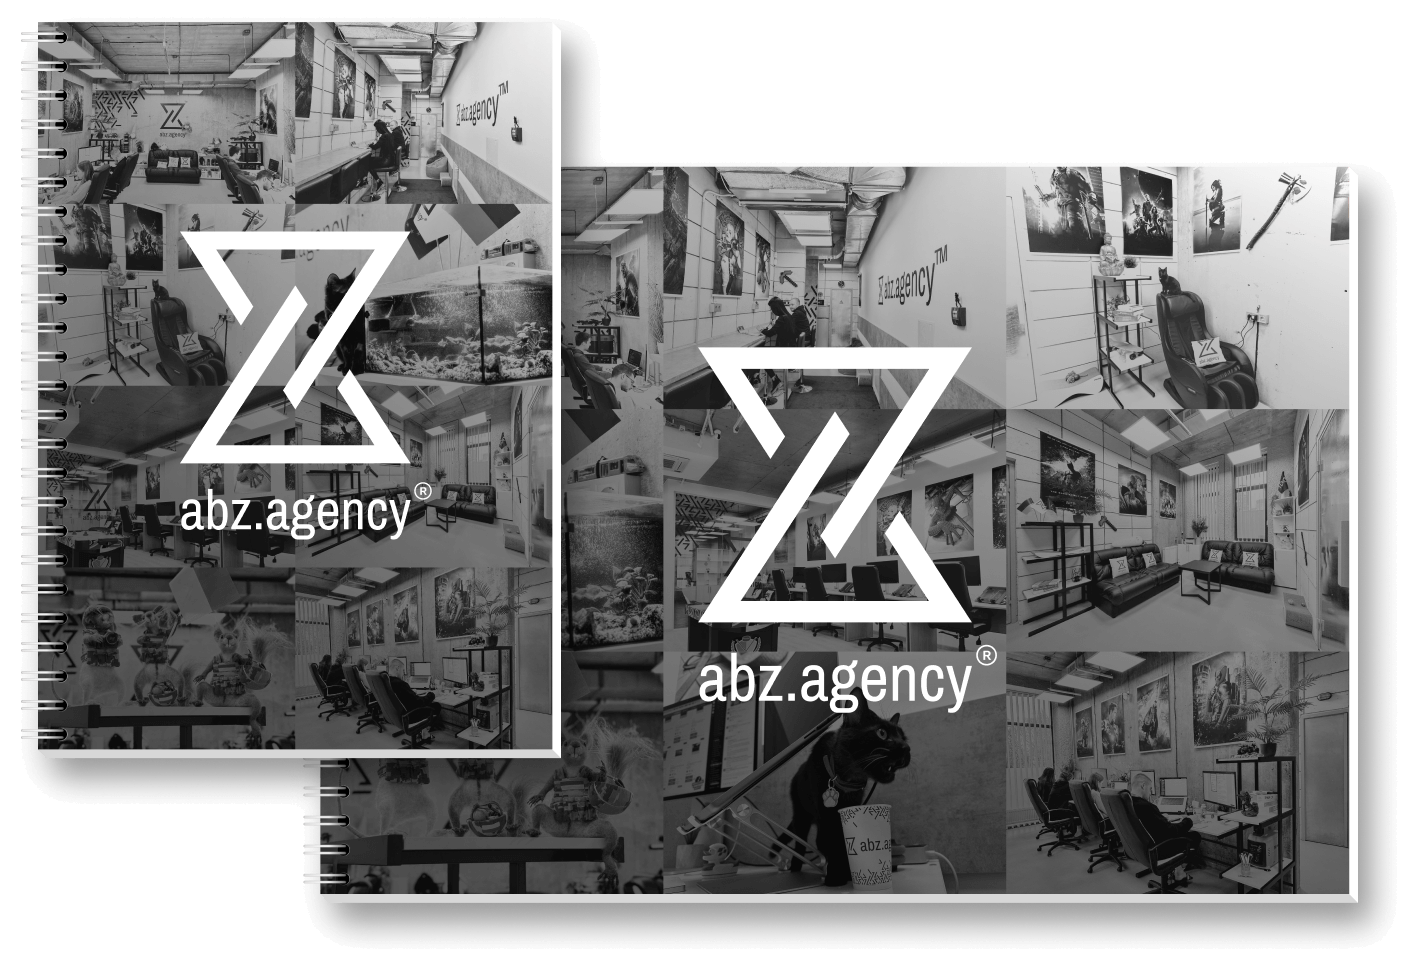 Notepads of abz.agency®